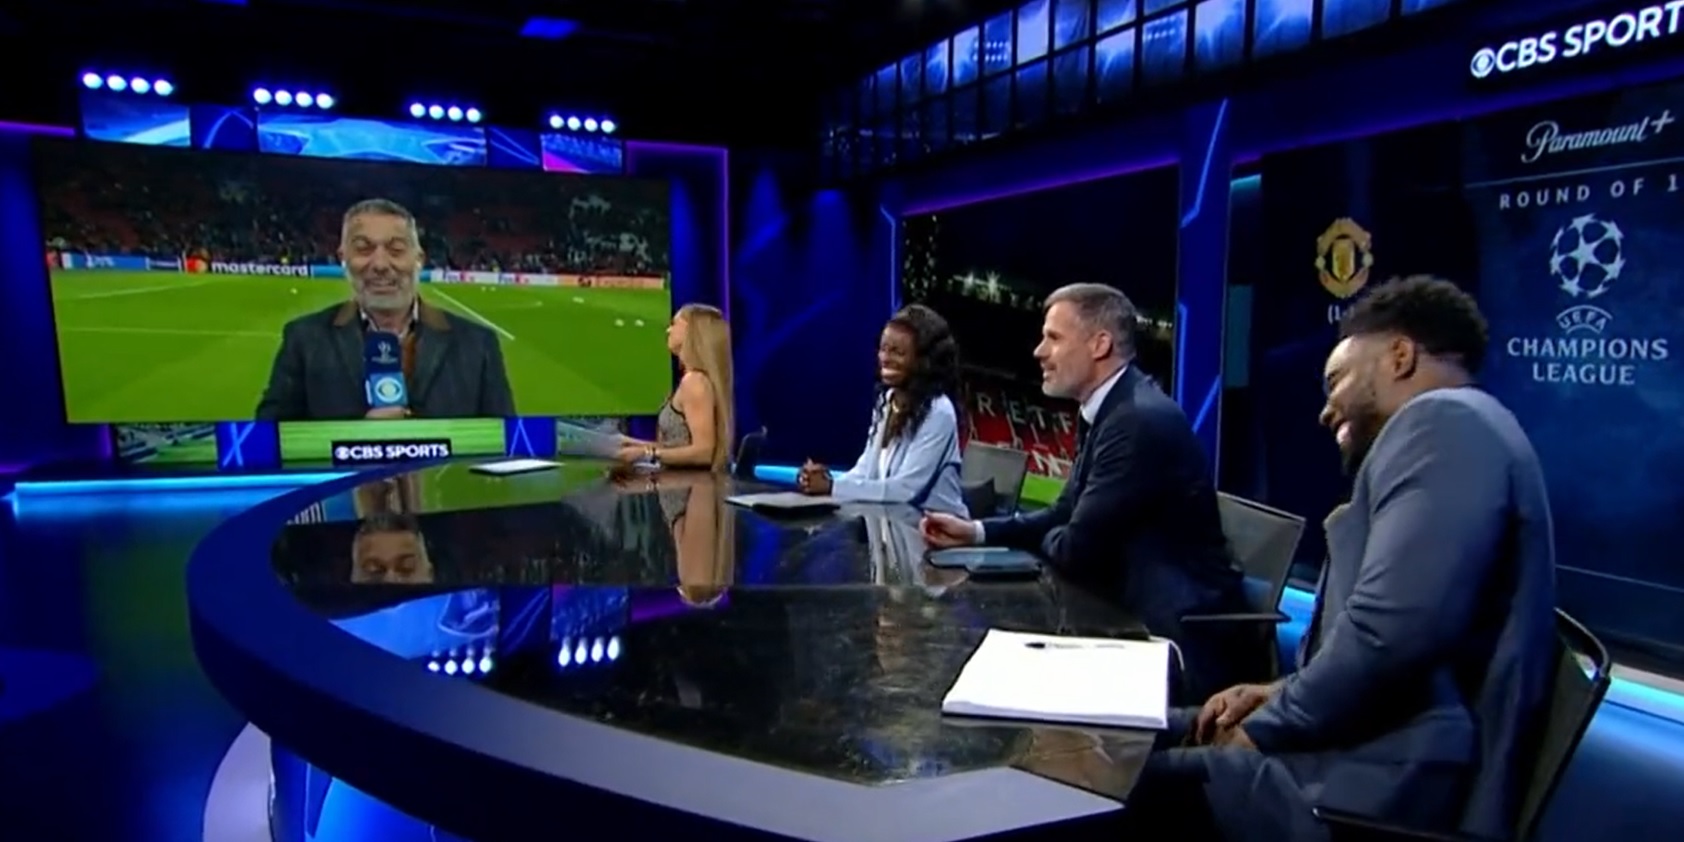 (Video) Watch Carragher join journalist in singing Ajax anthem ahead of Champions League tie